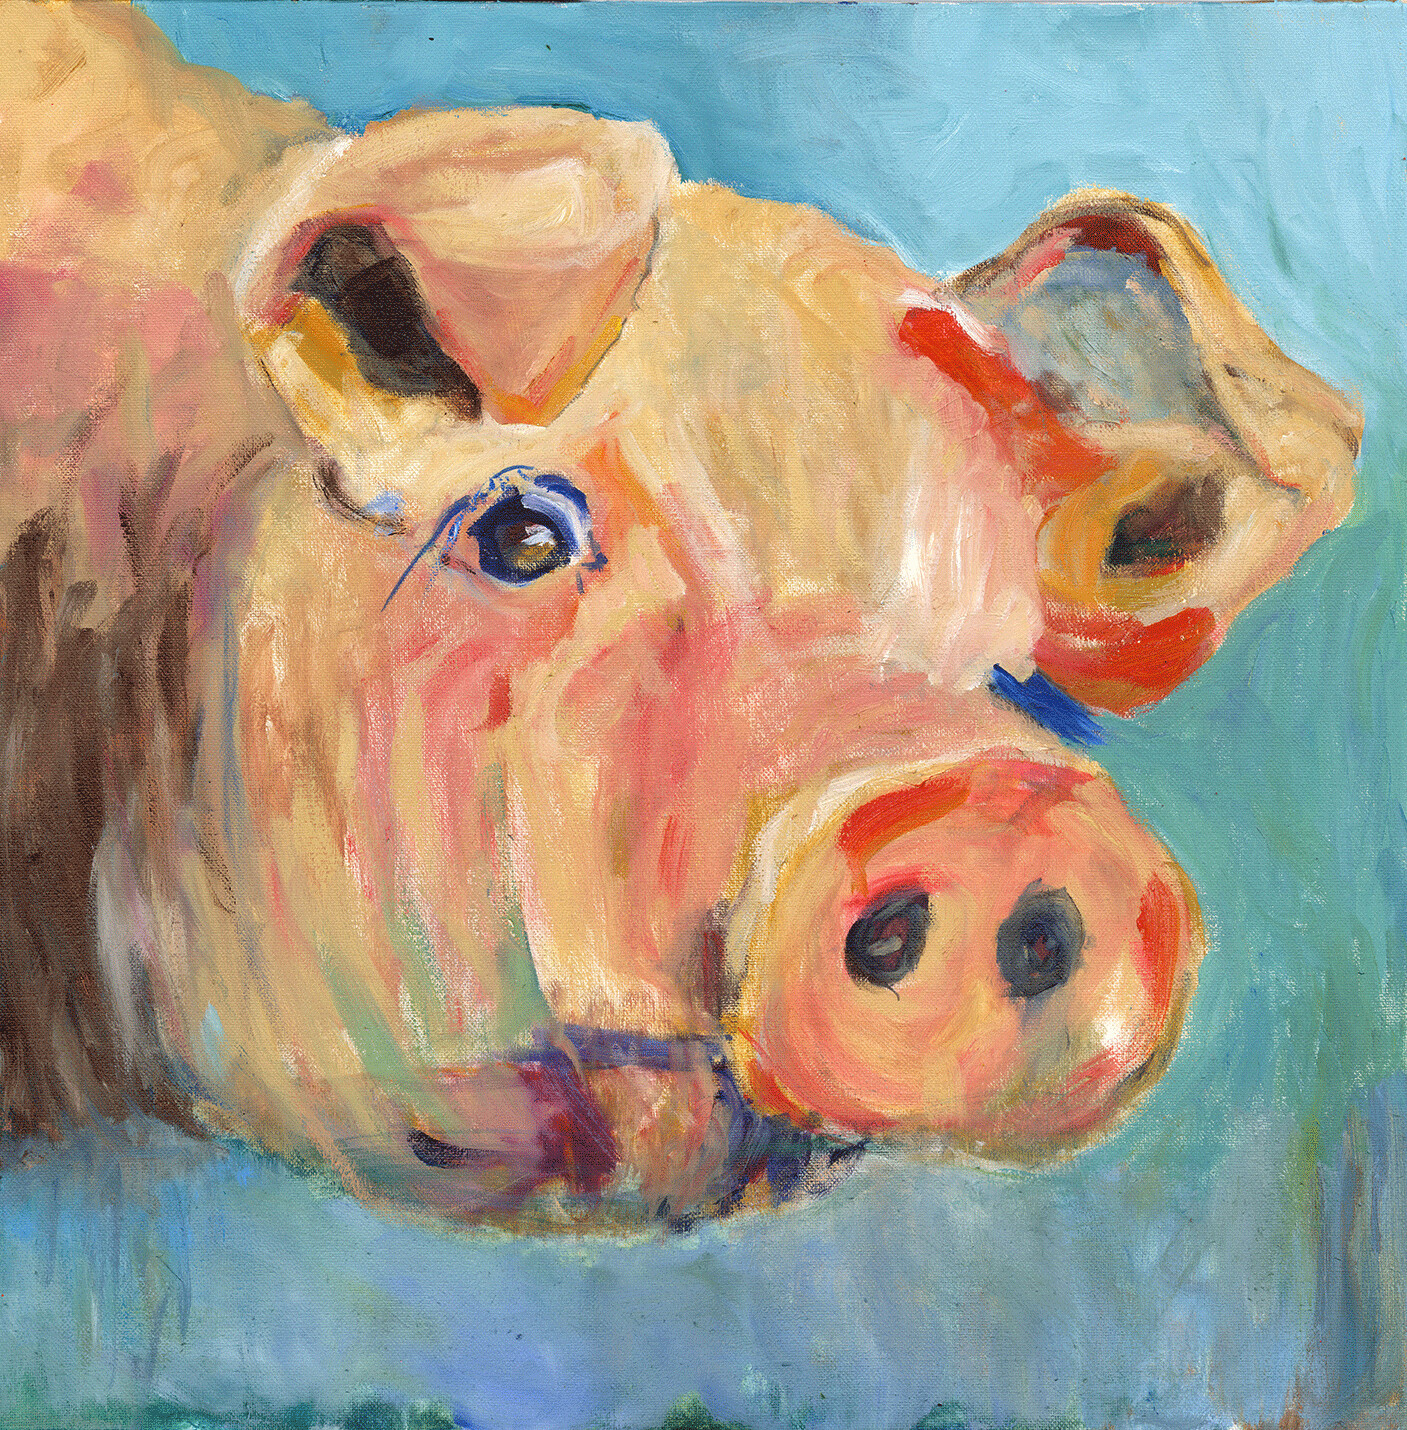 "That's Some Pig" by Don Rose